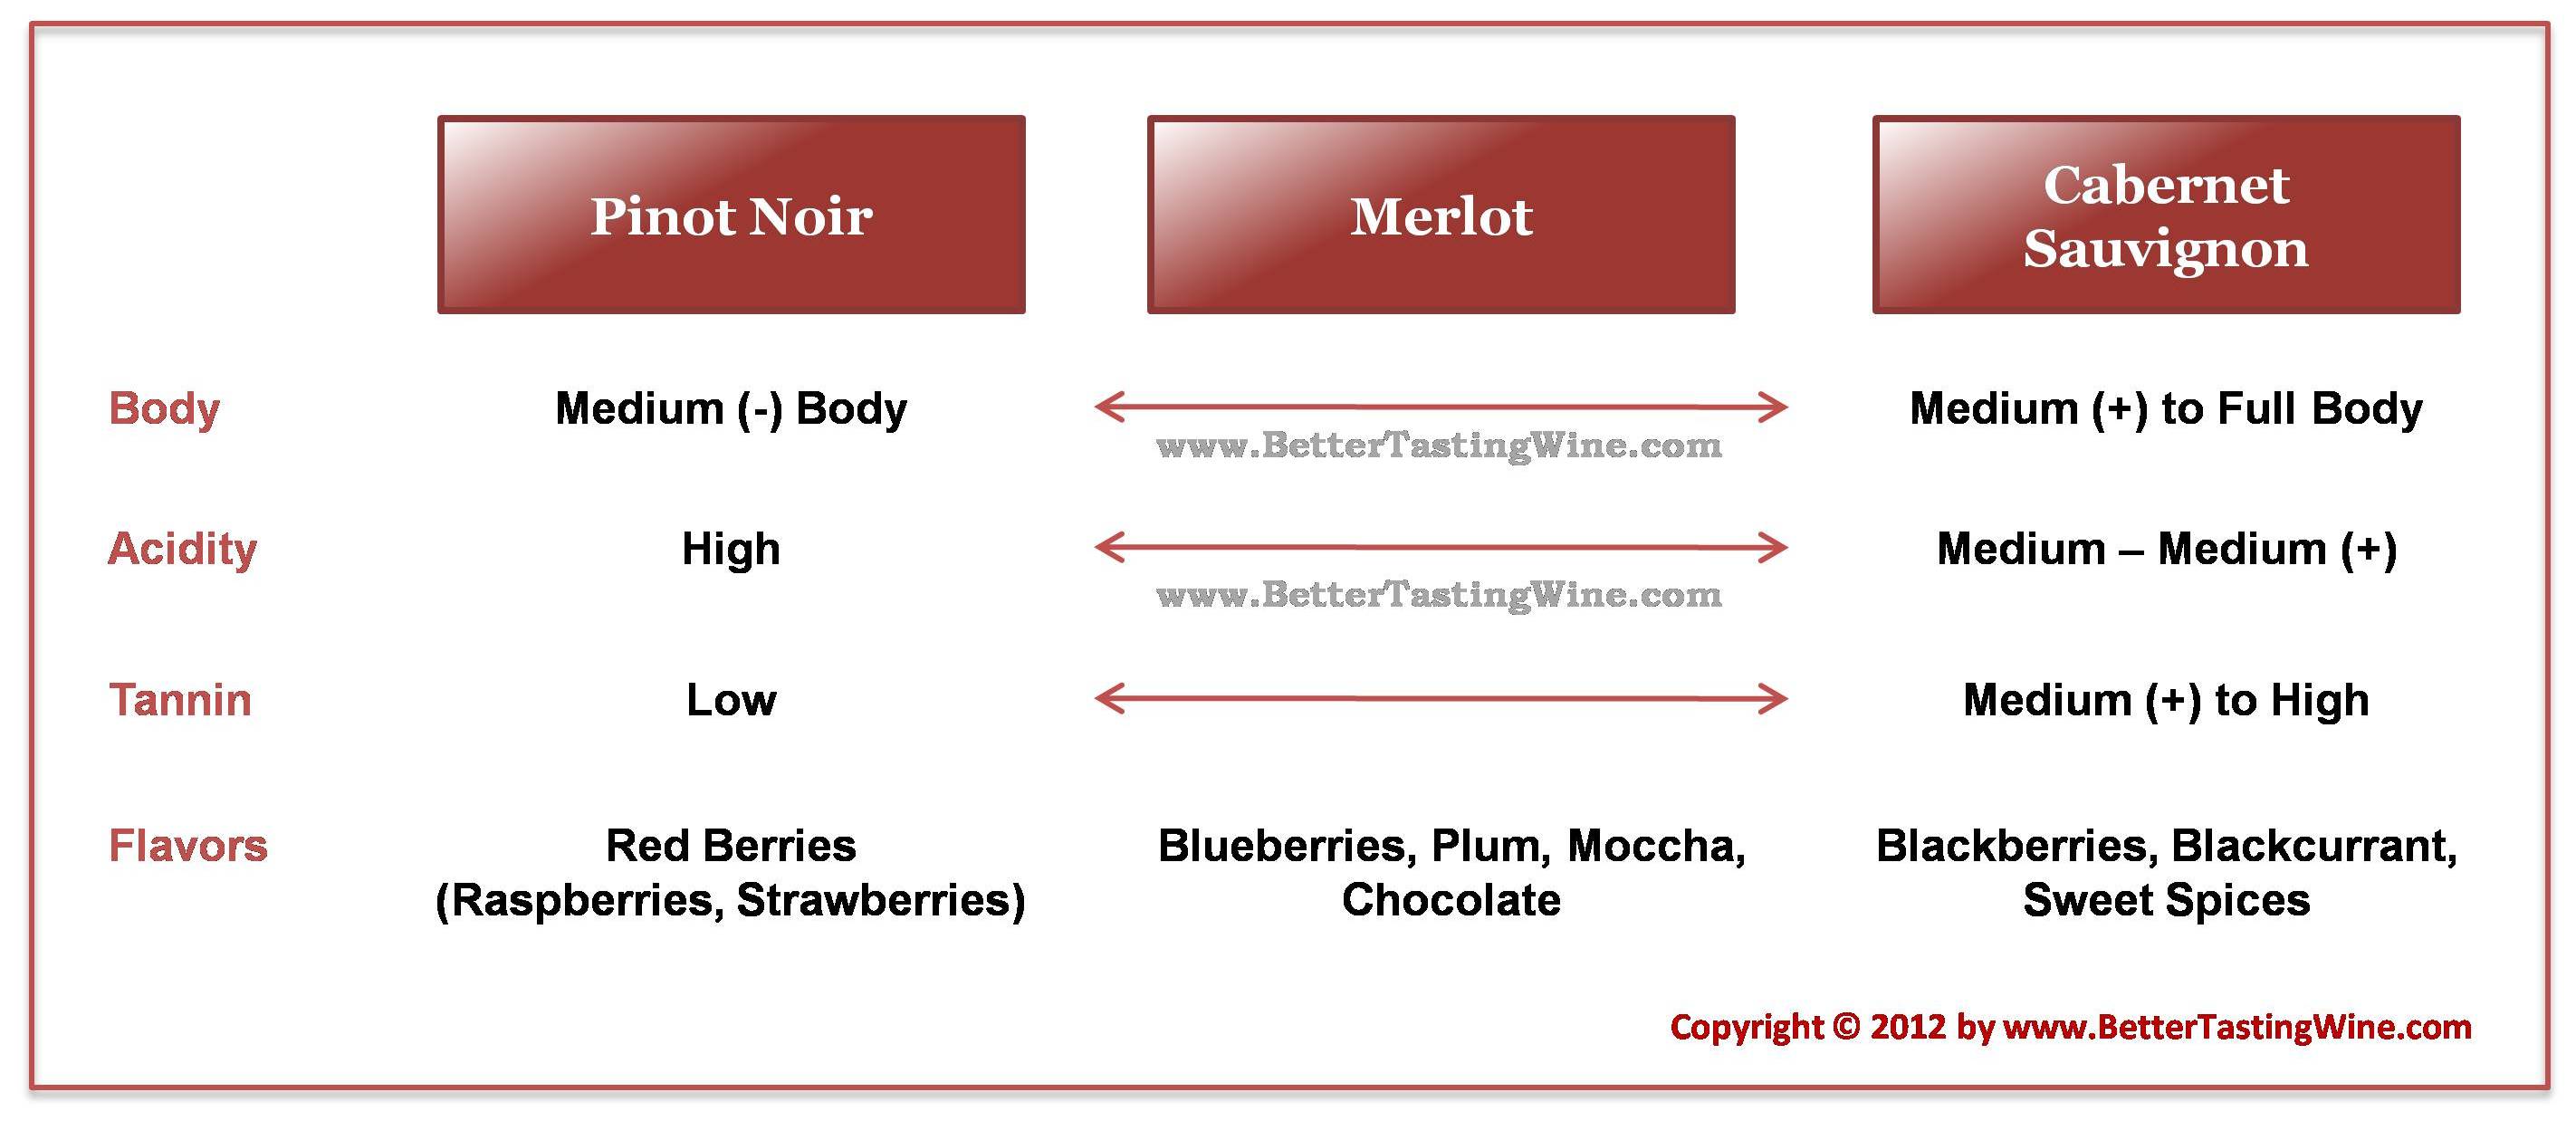 What is the difference between merlot and pinot noir wine?